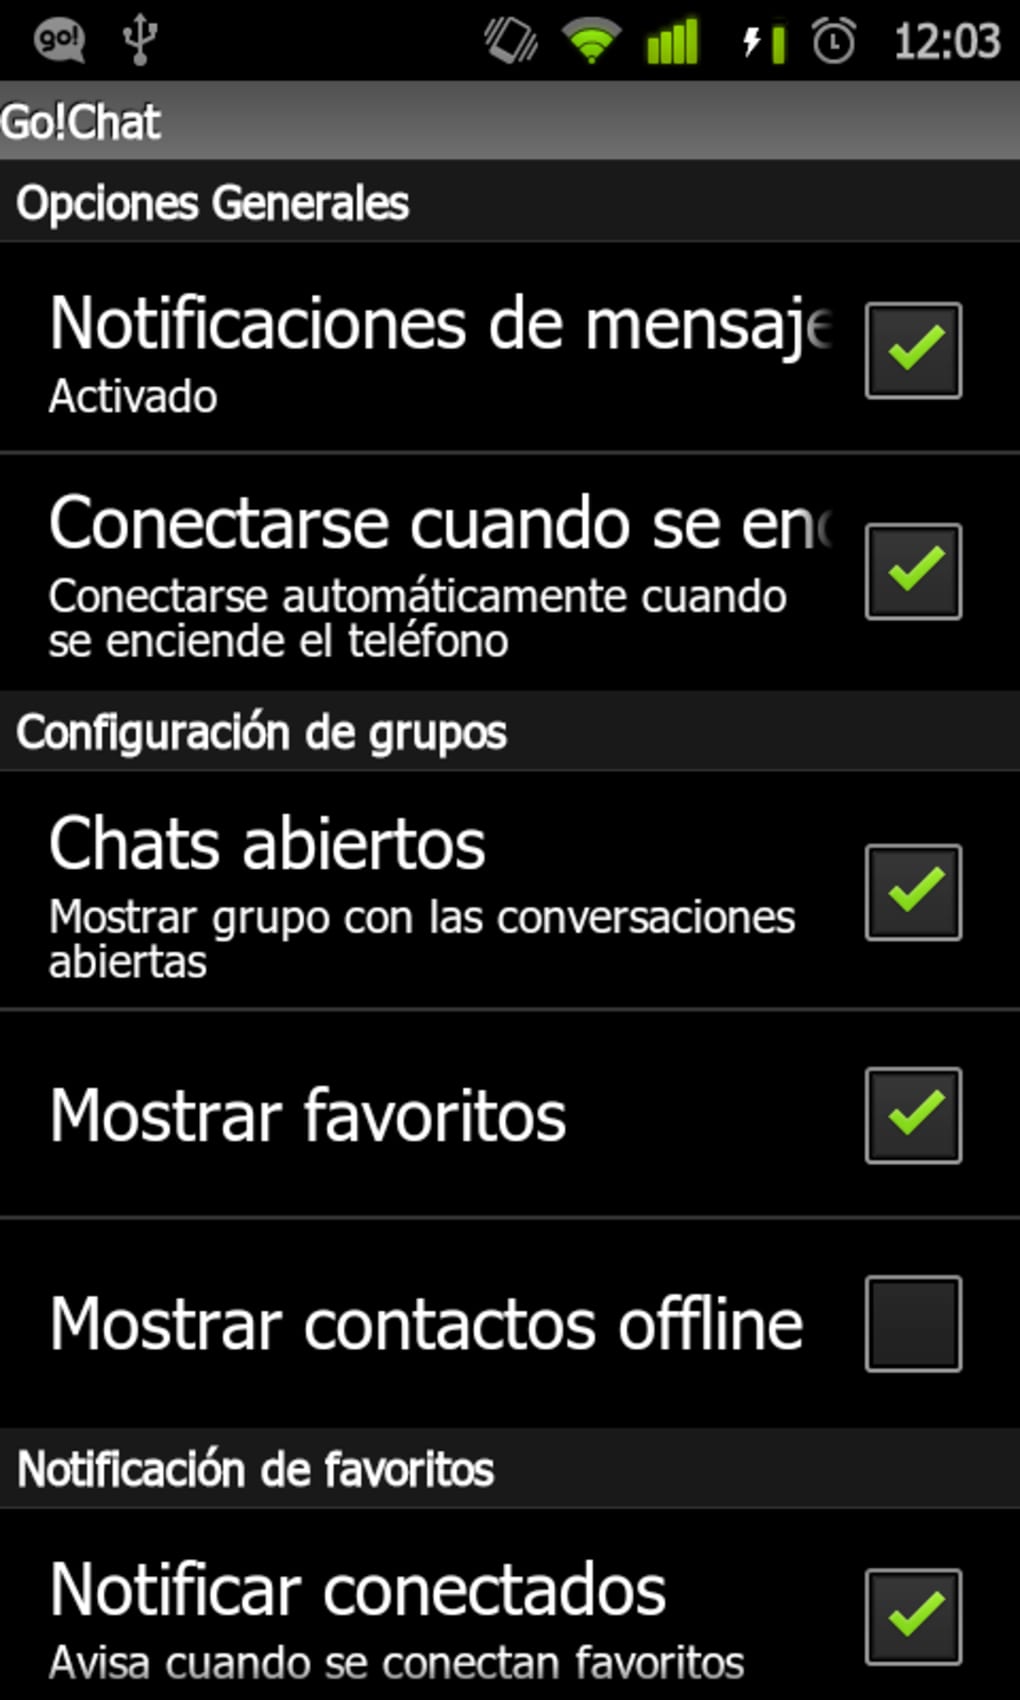 Go chat para que sirve